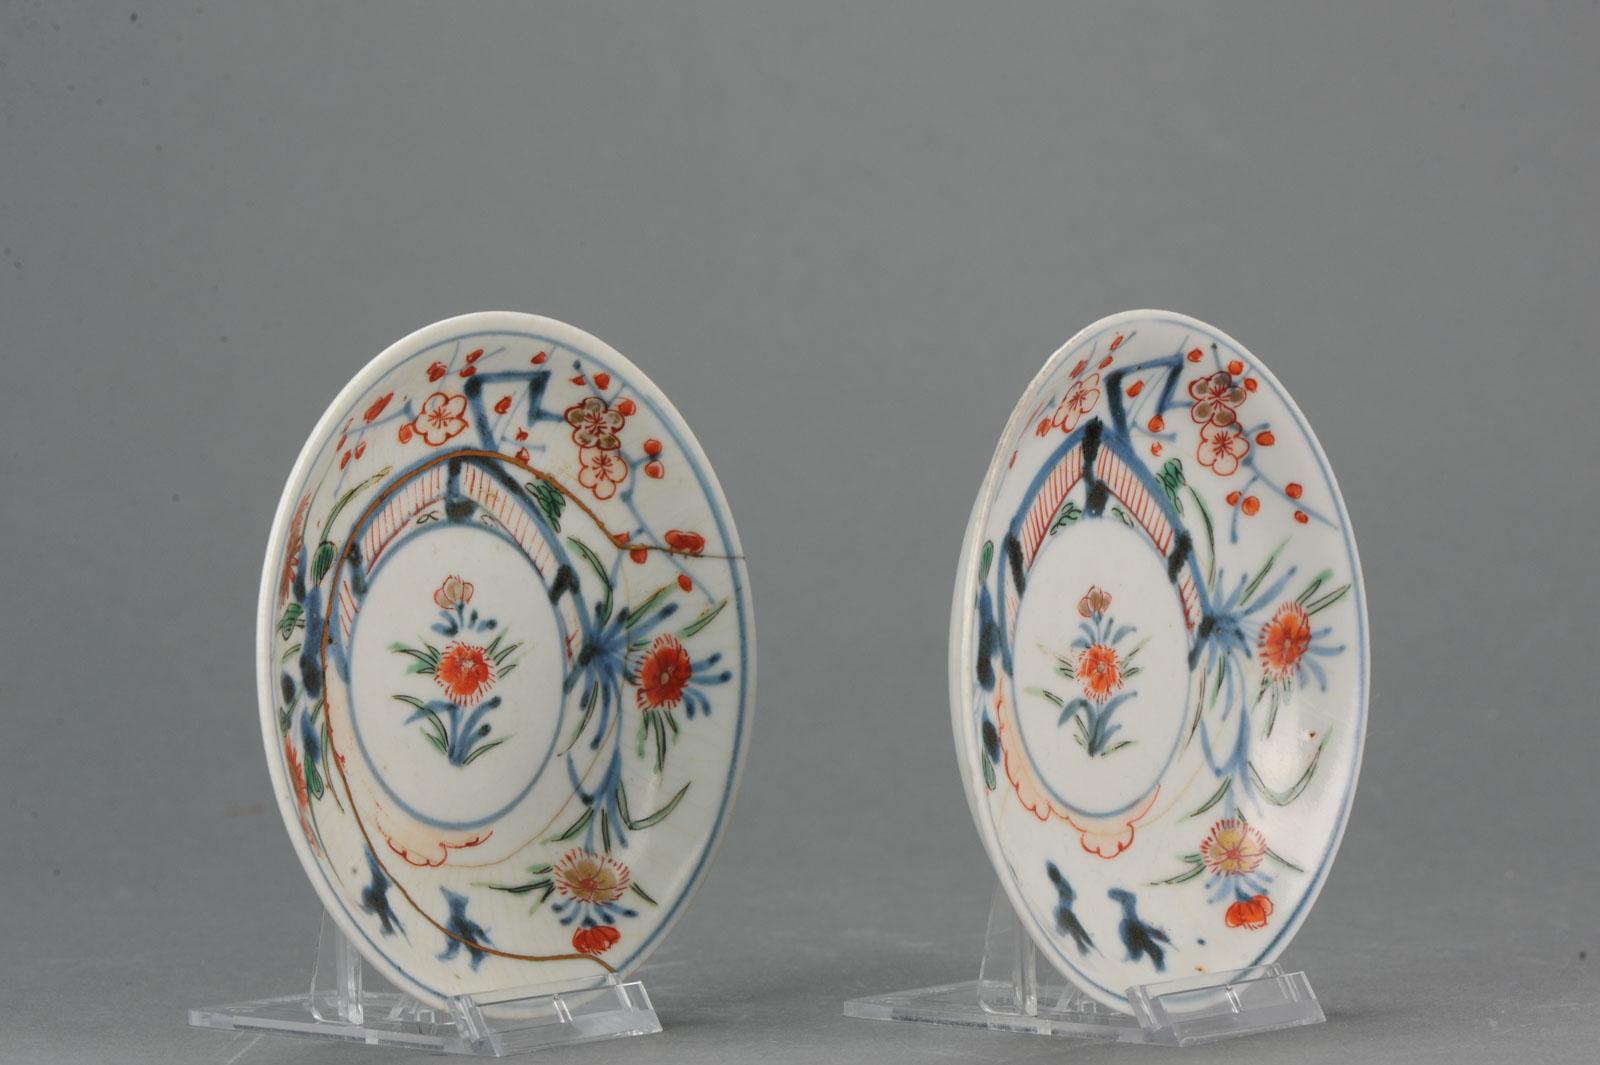 Lovely & High Quality Set of 2 Japanese Porcelain Imari plates.

24-10-18-1-7 Lovely & High Quality Japanese Porcelain Kakiemon plate.

Additional information:
Material: Porcelain
Type: Plates
Region of Origin: Japan
Country of Manufacturing: